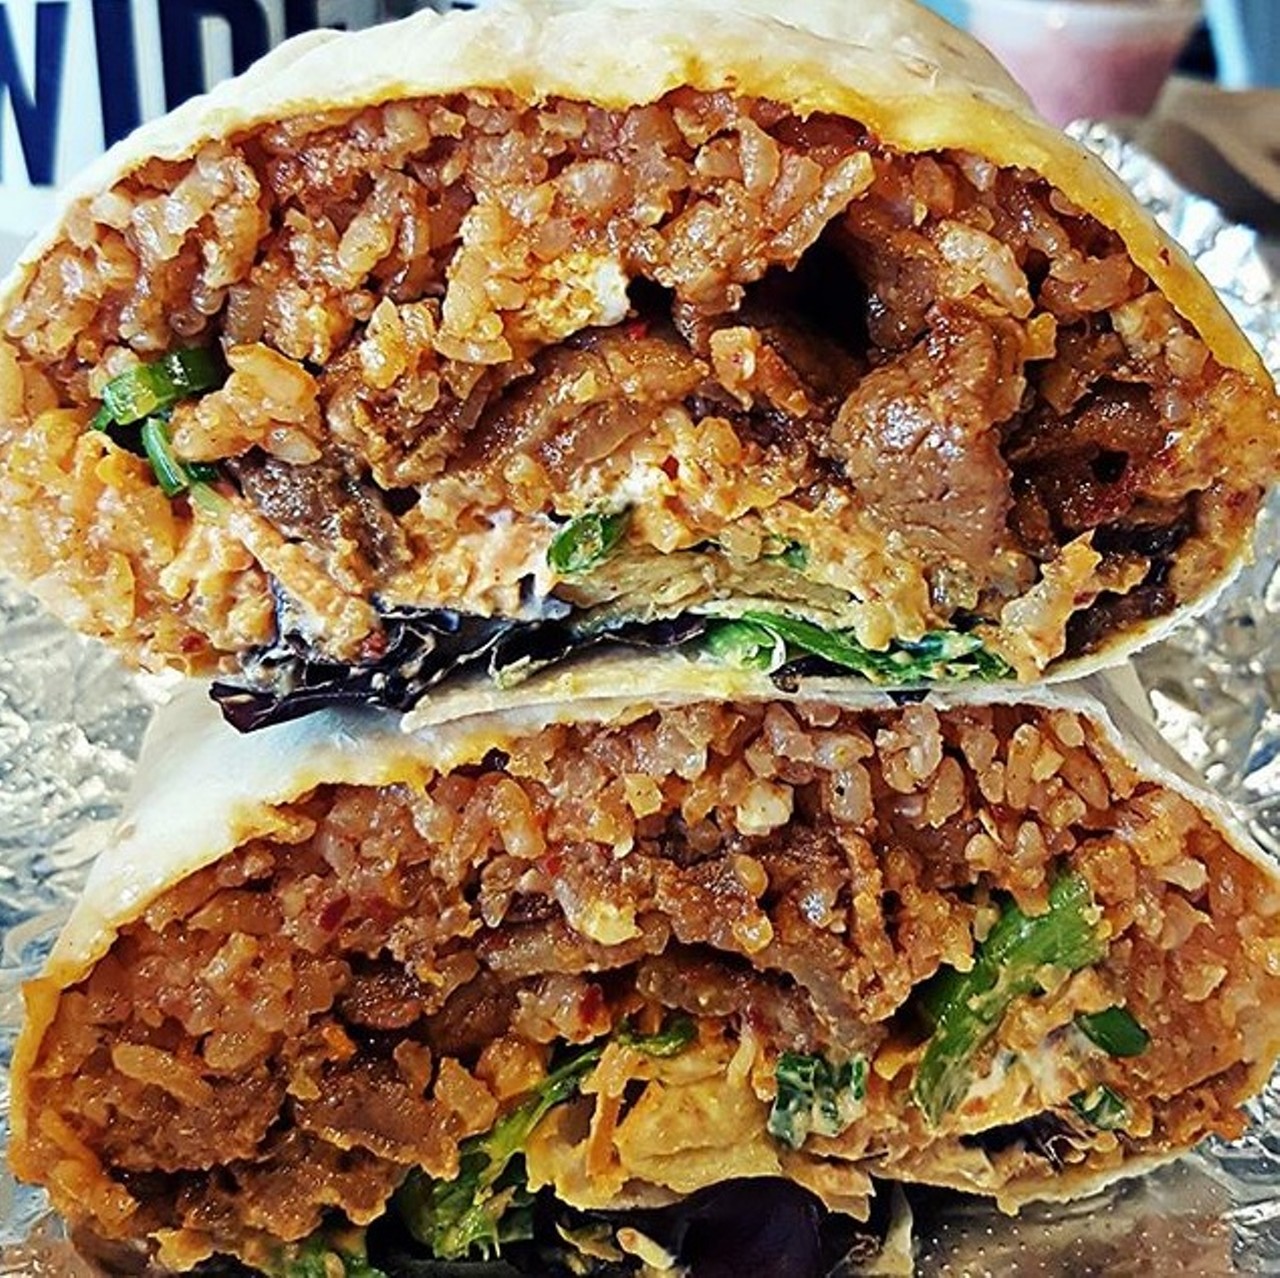 Burritos - Seoul Taco
St. Louis&#146; David Choi didn&#146;t invent Korean-Mexican fusion, but he sure has perfected it. Since opening his Seoul Taco food truck in 2011, the restaurateur has grown his brand, first as a small brick-and-mortar location and now as a burgeoning regional chain with locations from Columbia to Chicago. If you wonder how he&#146;s become so successful in such a short time, head to his Delmar Loop storefront and order one of his gigantic burritos stuffed with bulgogi steak. The juicy beef, marinated in a mouthwatering cocktail of soy, sesame oil, sugar, garlic and ginger, is paired with kimchi fried rice and accouterments then wrapped in a tortilla. The marinade and kimchi jus combine with sour cream to create a glorious burst of flavor that can no more be contained in a wrap than Choi&#146;s business can be contained in a tiny truck. Photo courtesy of Instagram / foodandtraveljunkie via pikore.com.